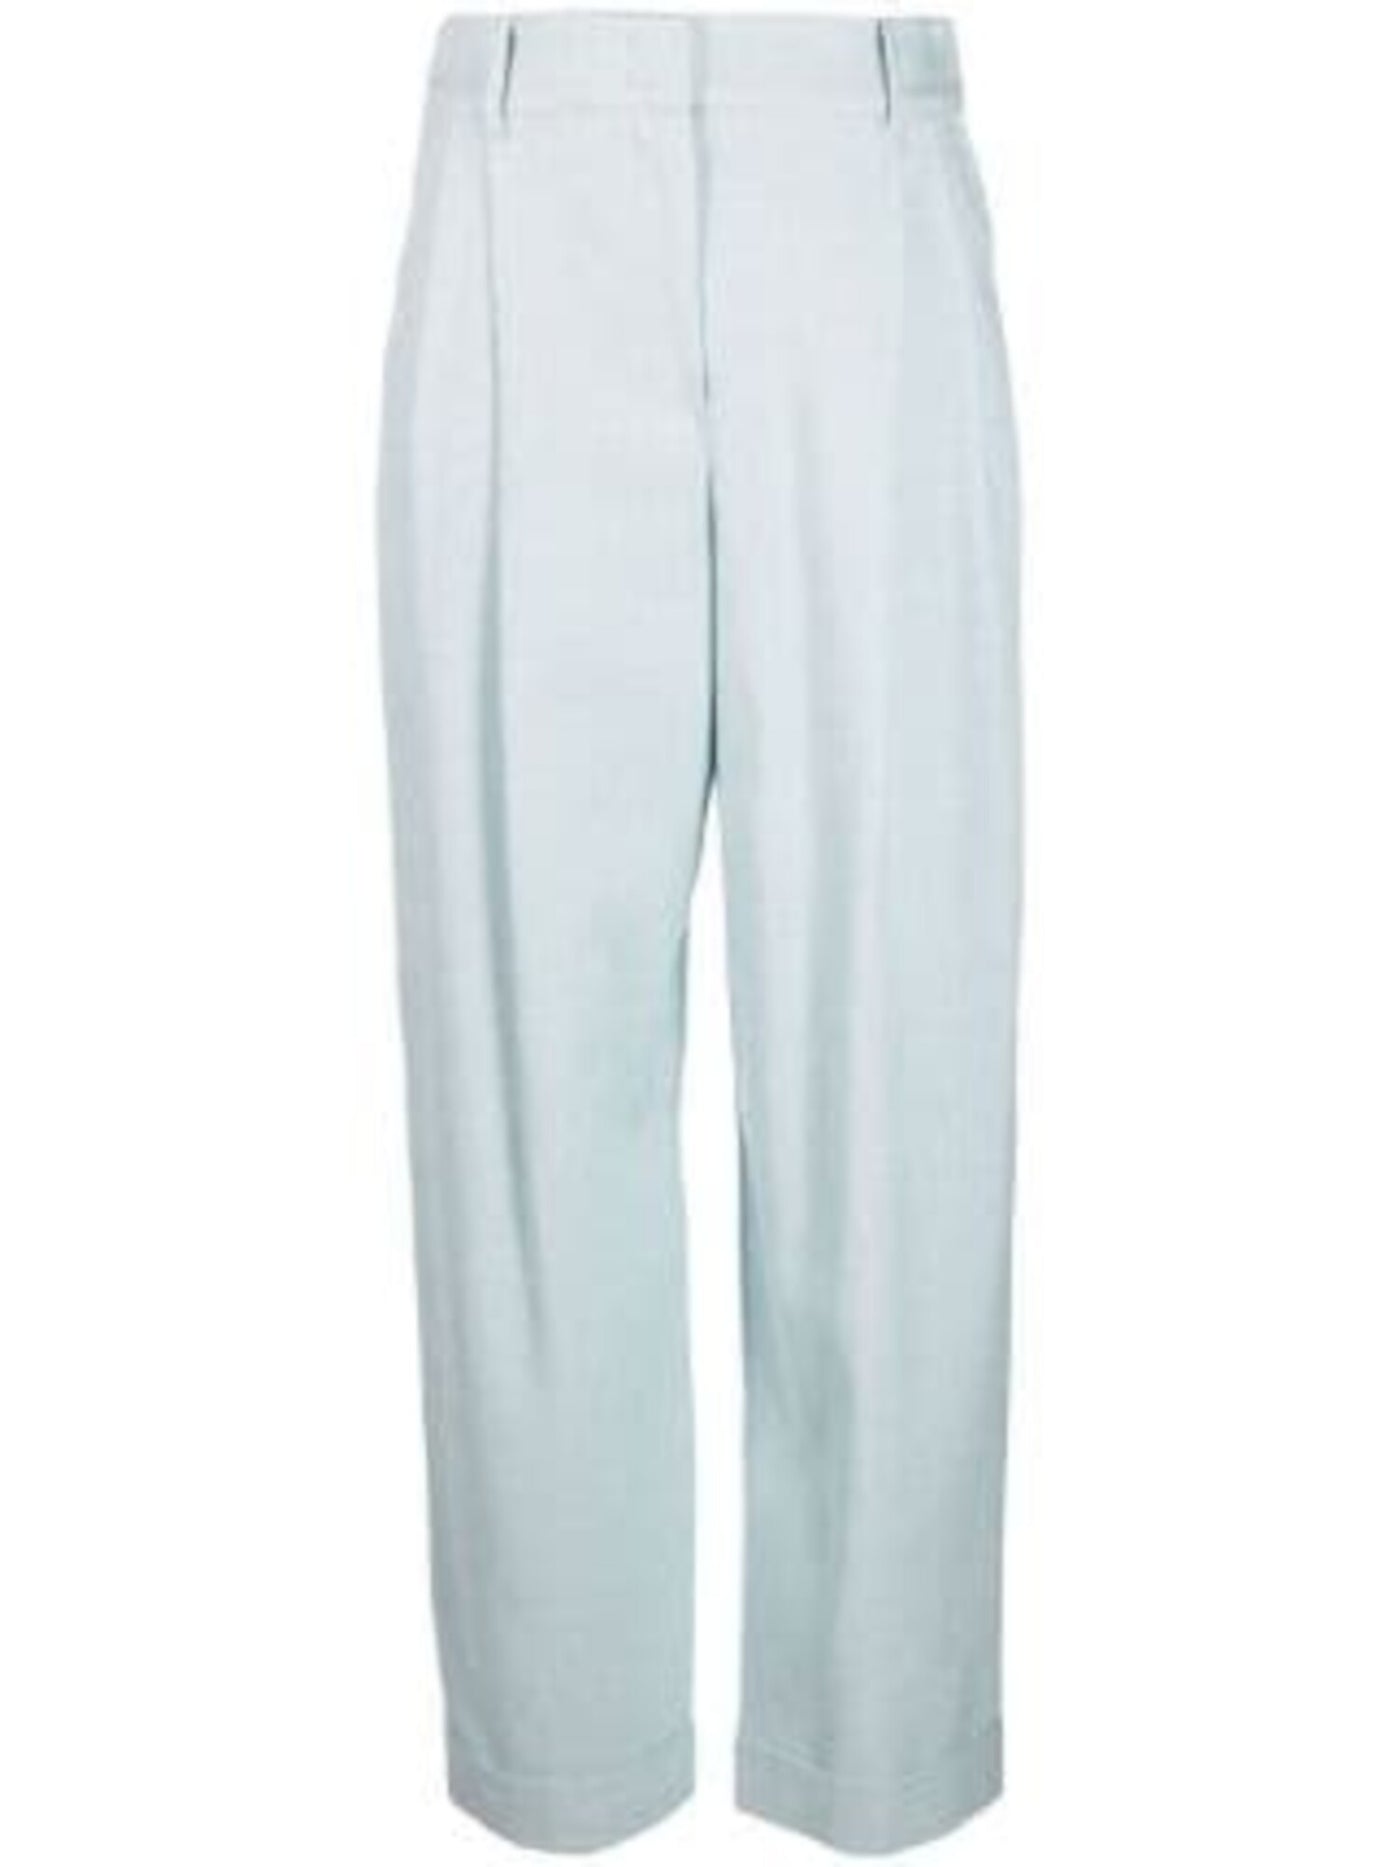 EMPORIO ARMANI Womens Light Blue Stretch Pocketed Wear To Work High Waist Pants 42